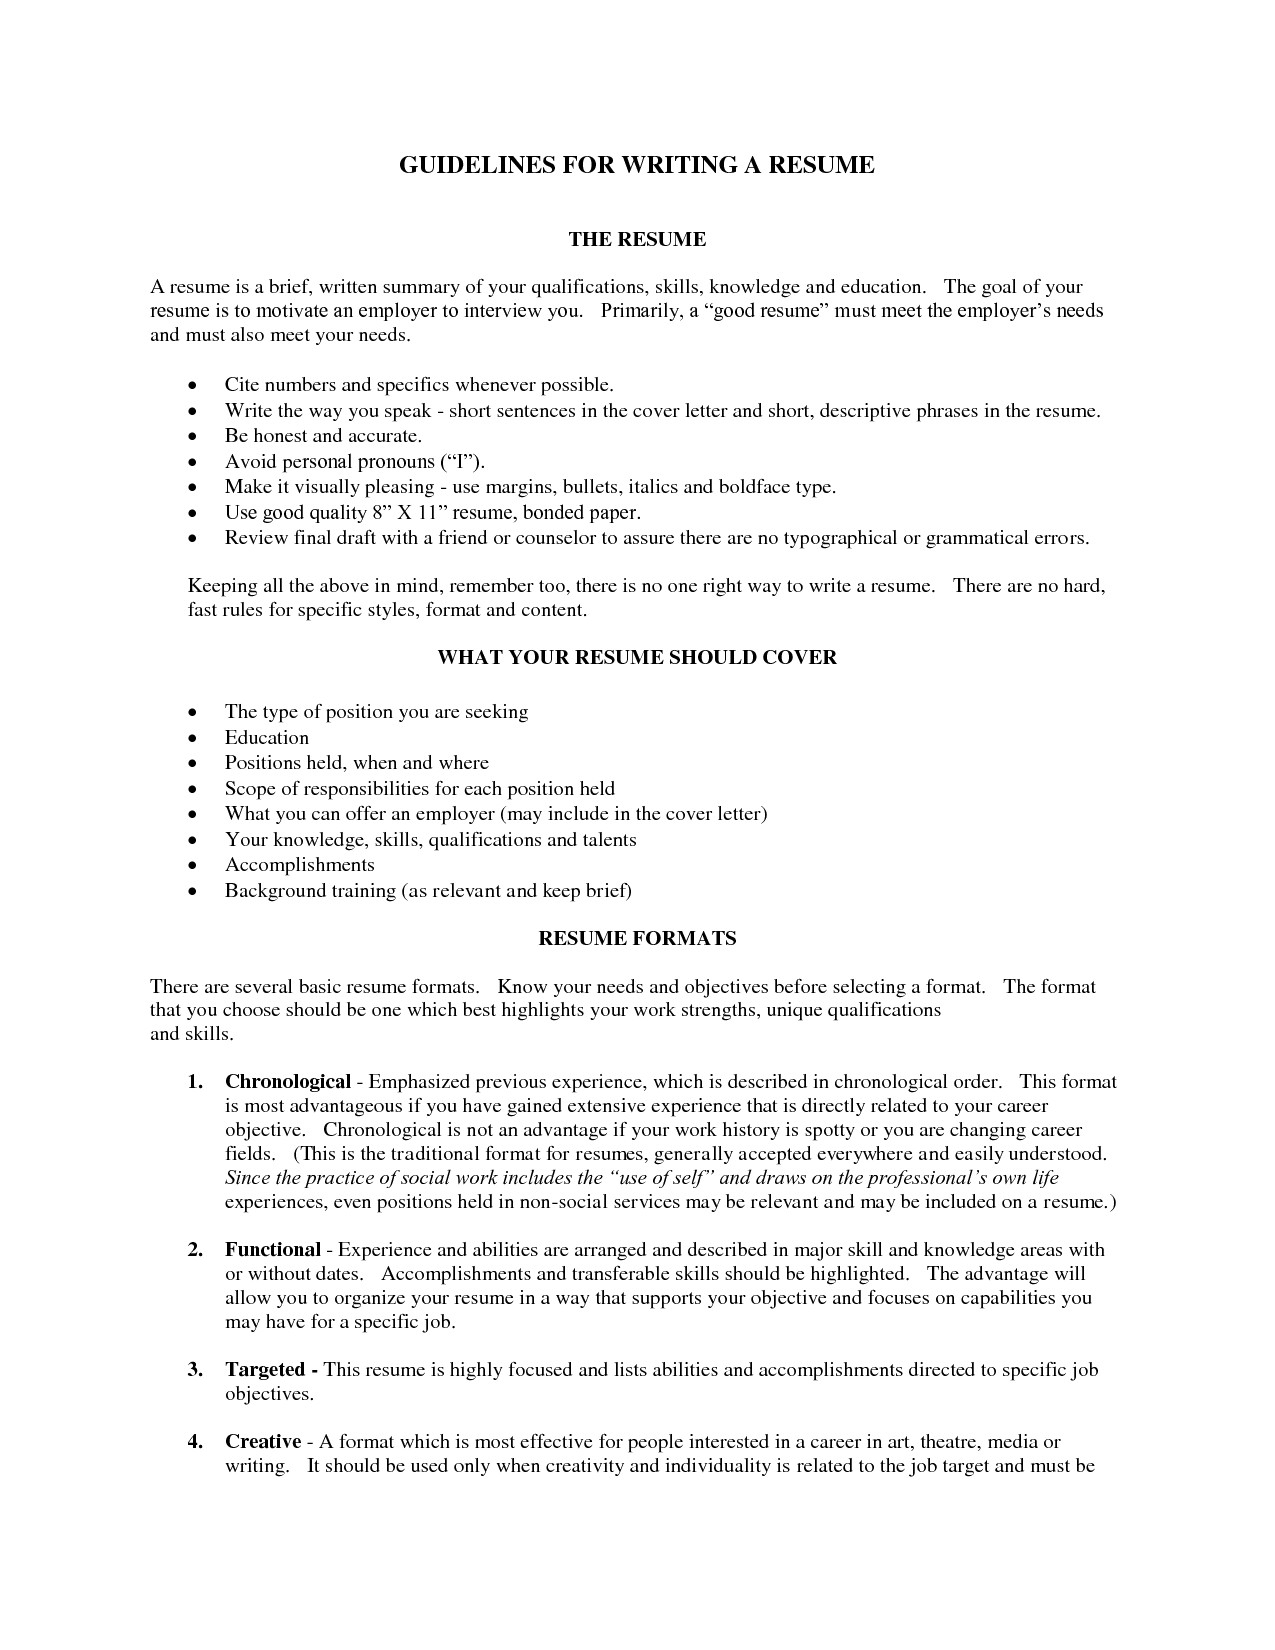 Resume Summary Examples Resumes Professional Summary Examples Resume To Inspire You How